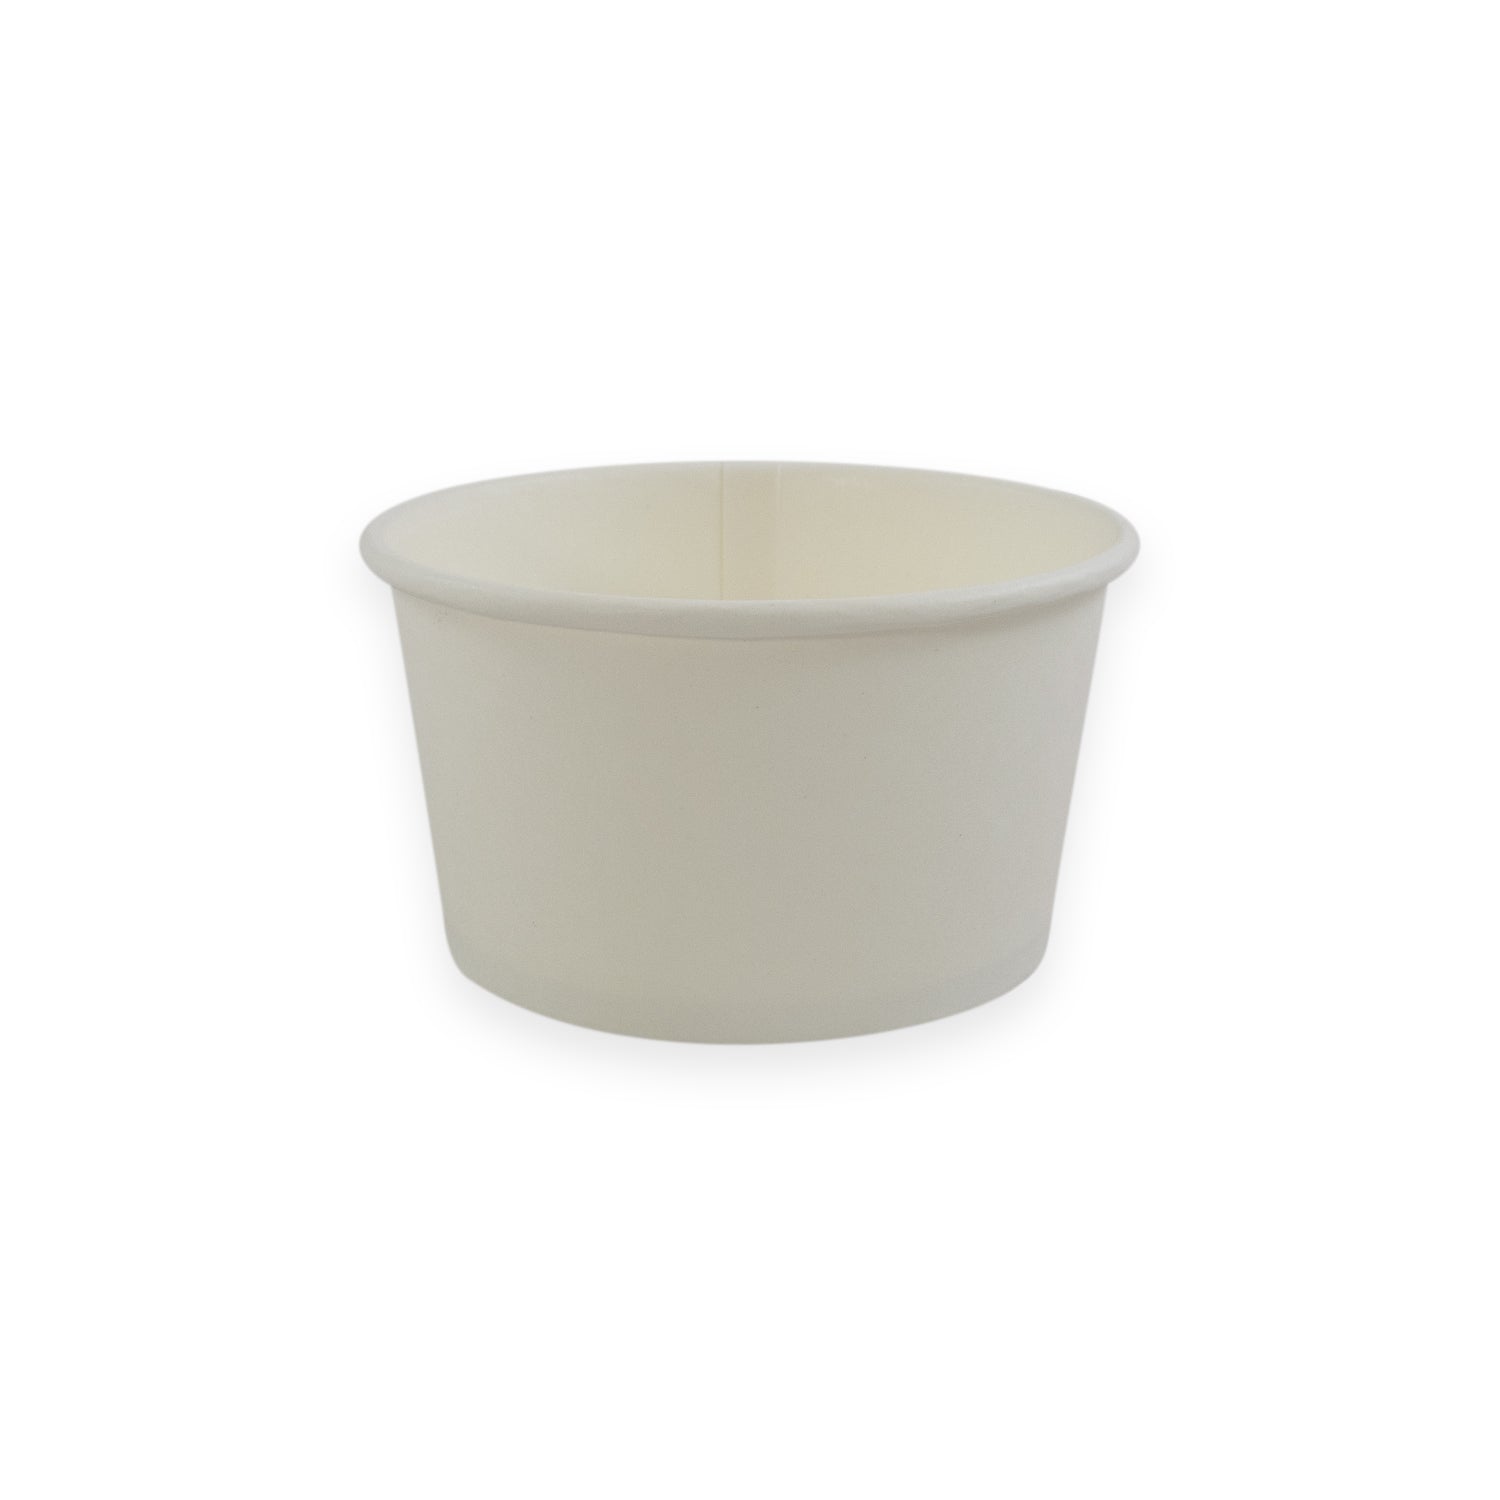 Sustain Sustain Paper Round Bowl/Container White 12oz 115mm - CT/500 Disposable Food Packaging Carton of 500 